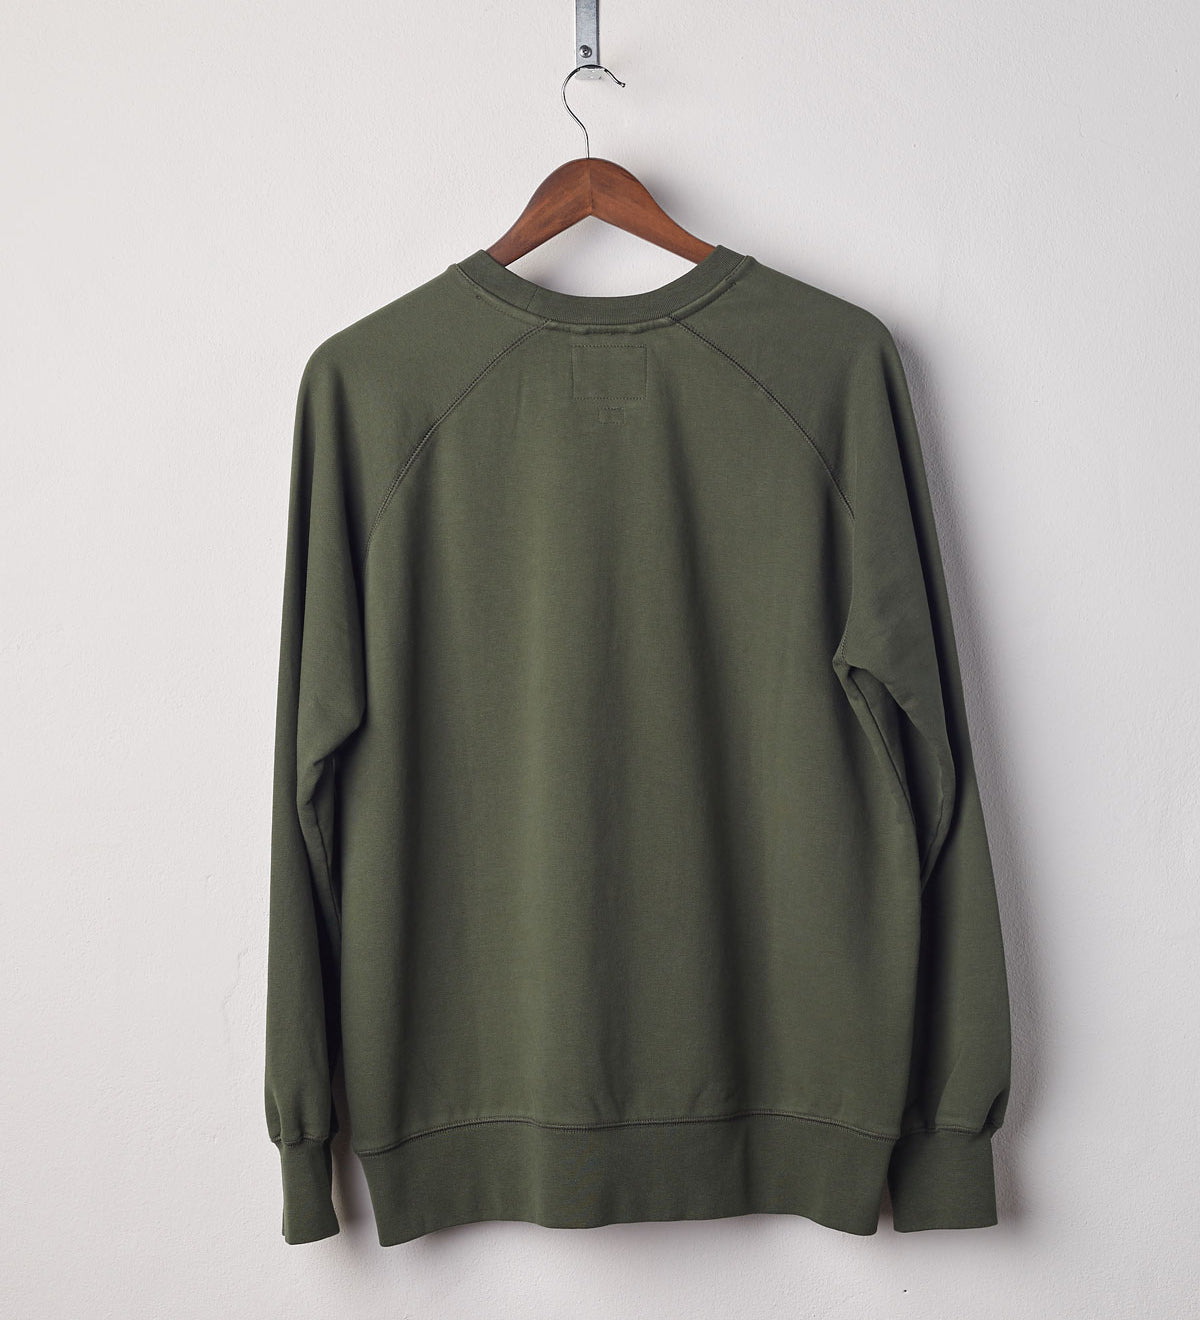 Back view of vine green organic heavyweight cotton #7005 jersey sweatshirt by Uskees presented on hanger.